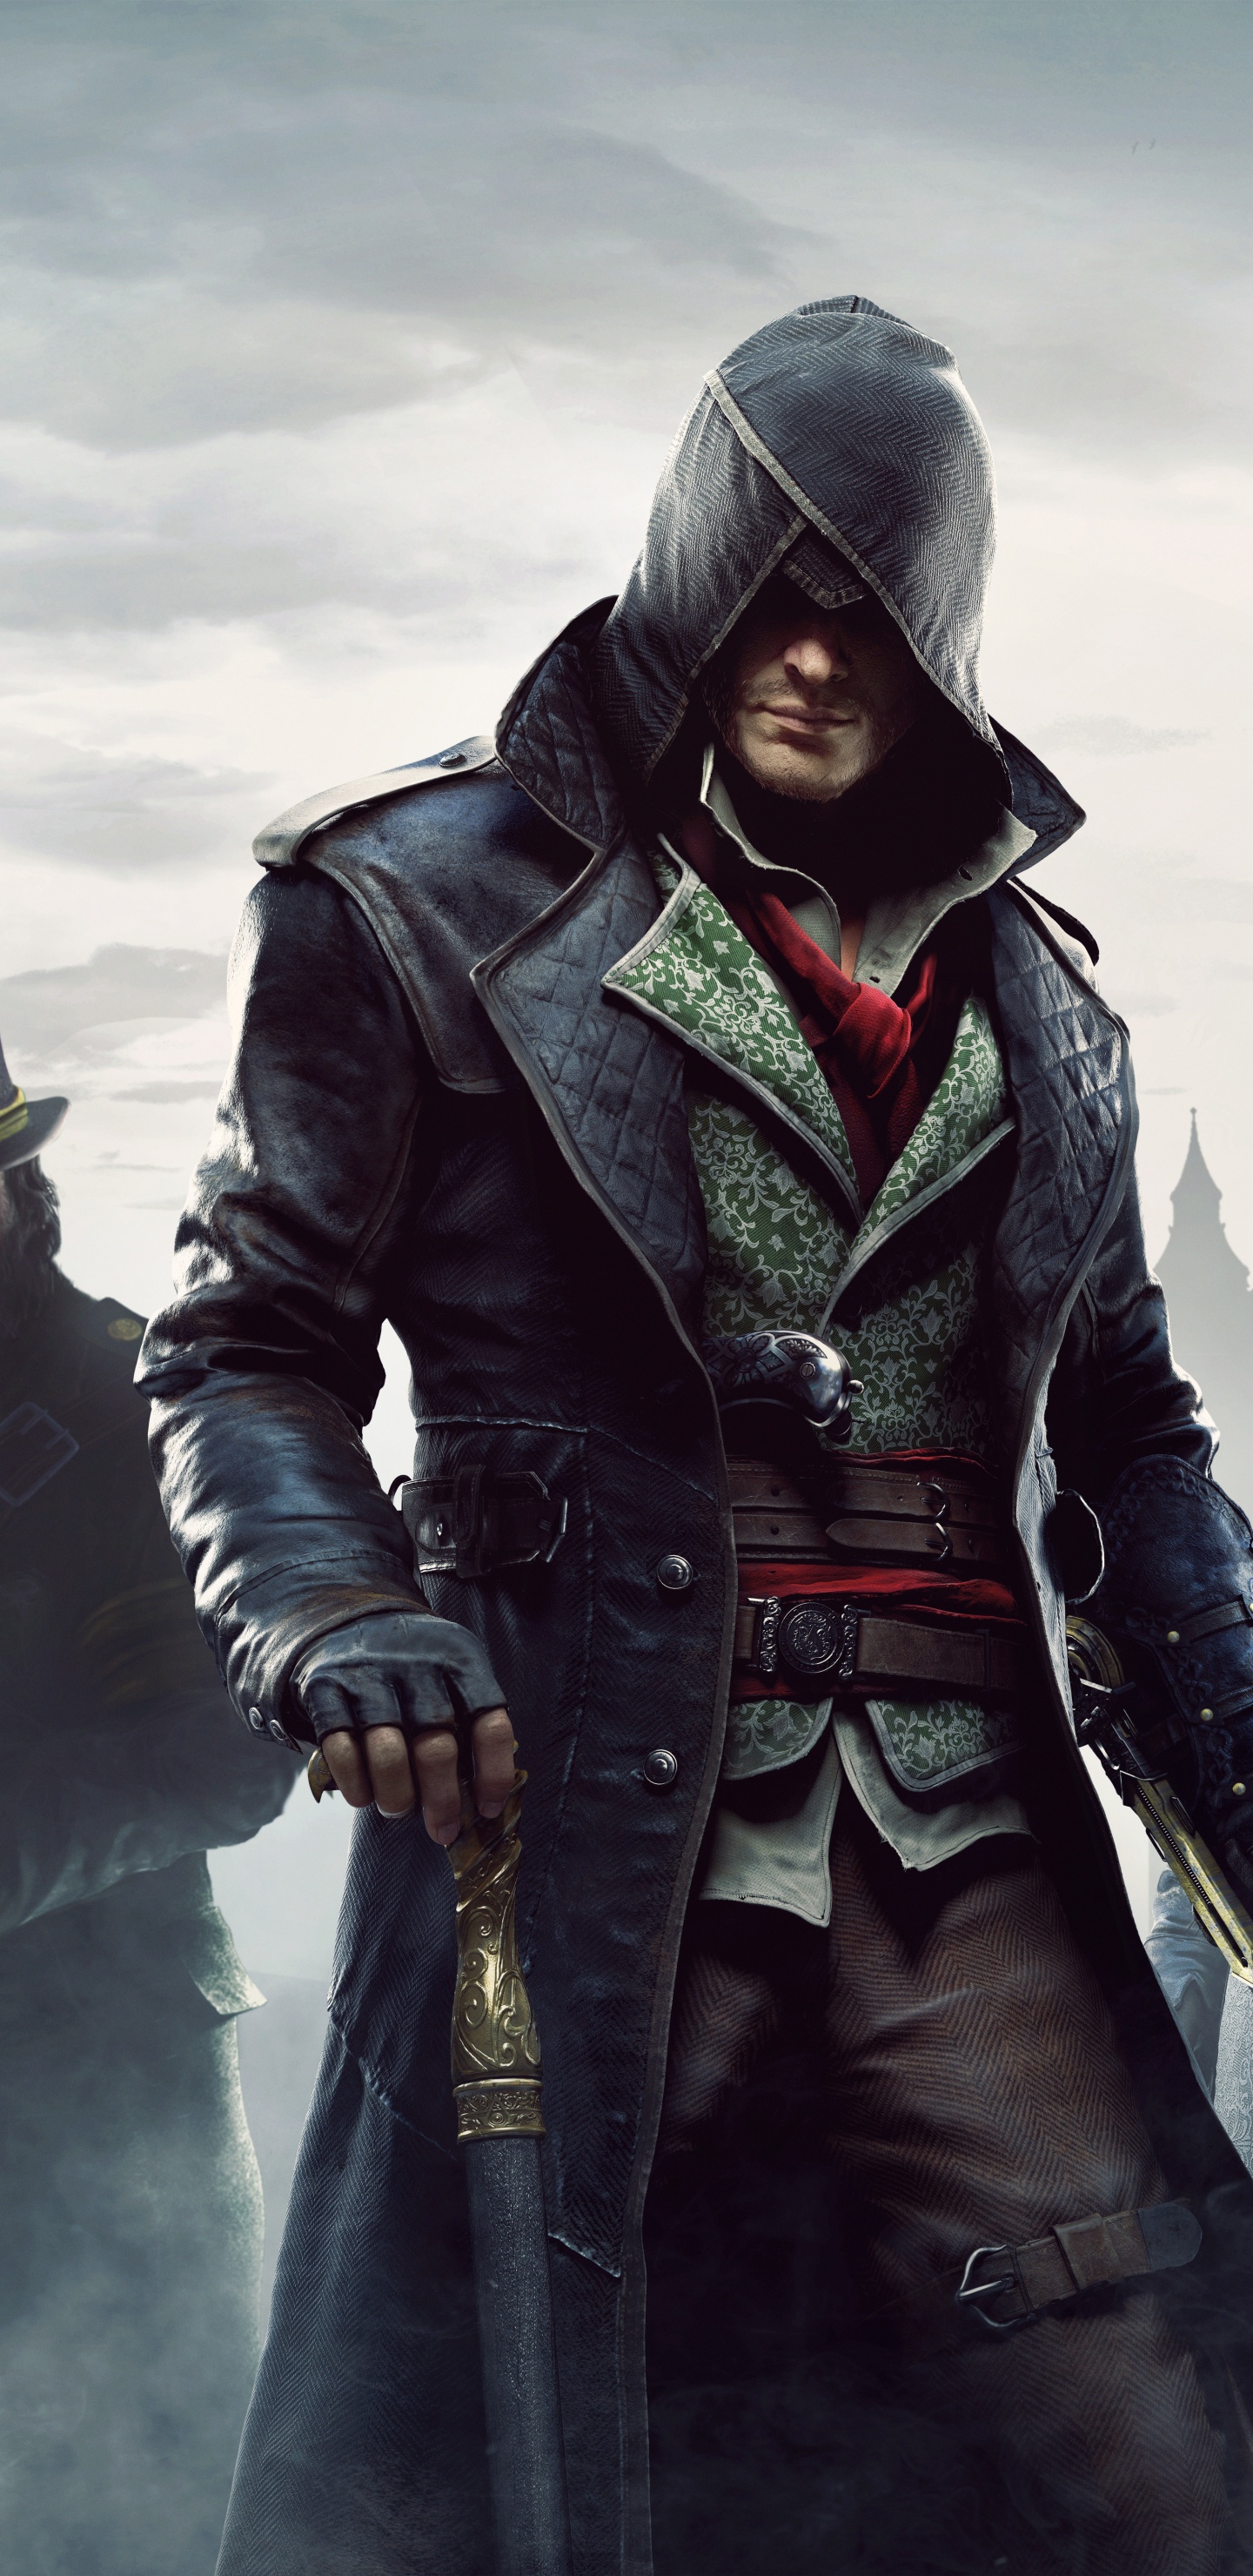 Assassins Creed Syndicate, Ubisoft, Pc-Spiel, Film, Assassins Creed Unity. Wallpaper in 1440x2960 Resolution